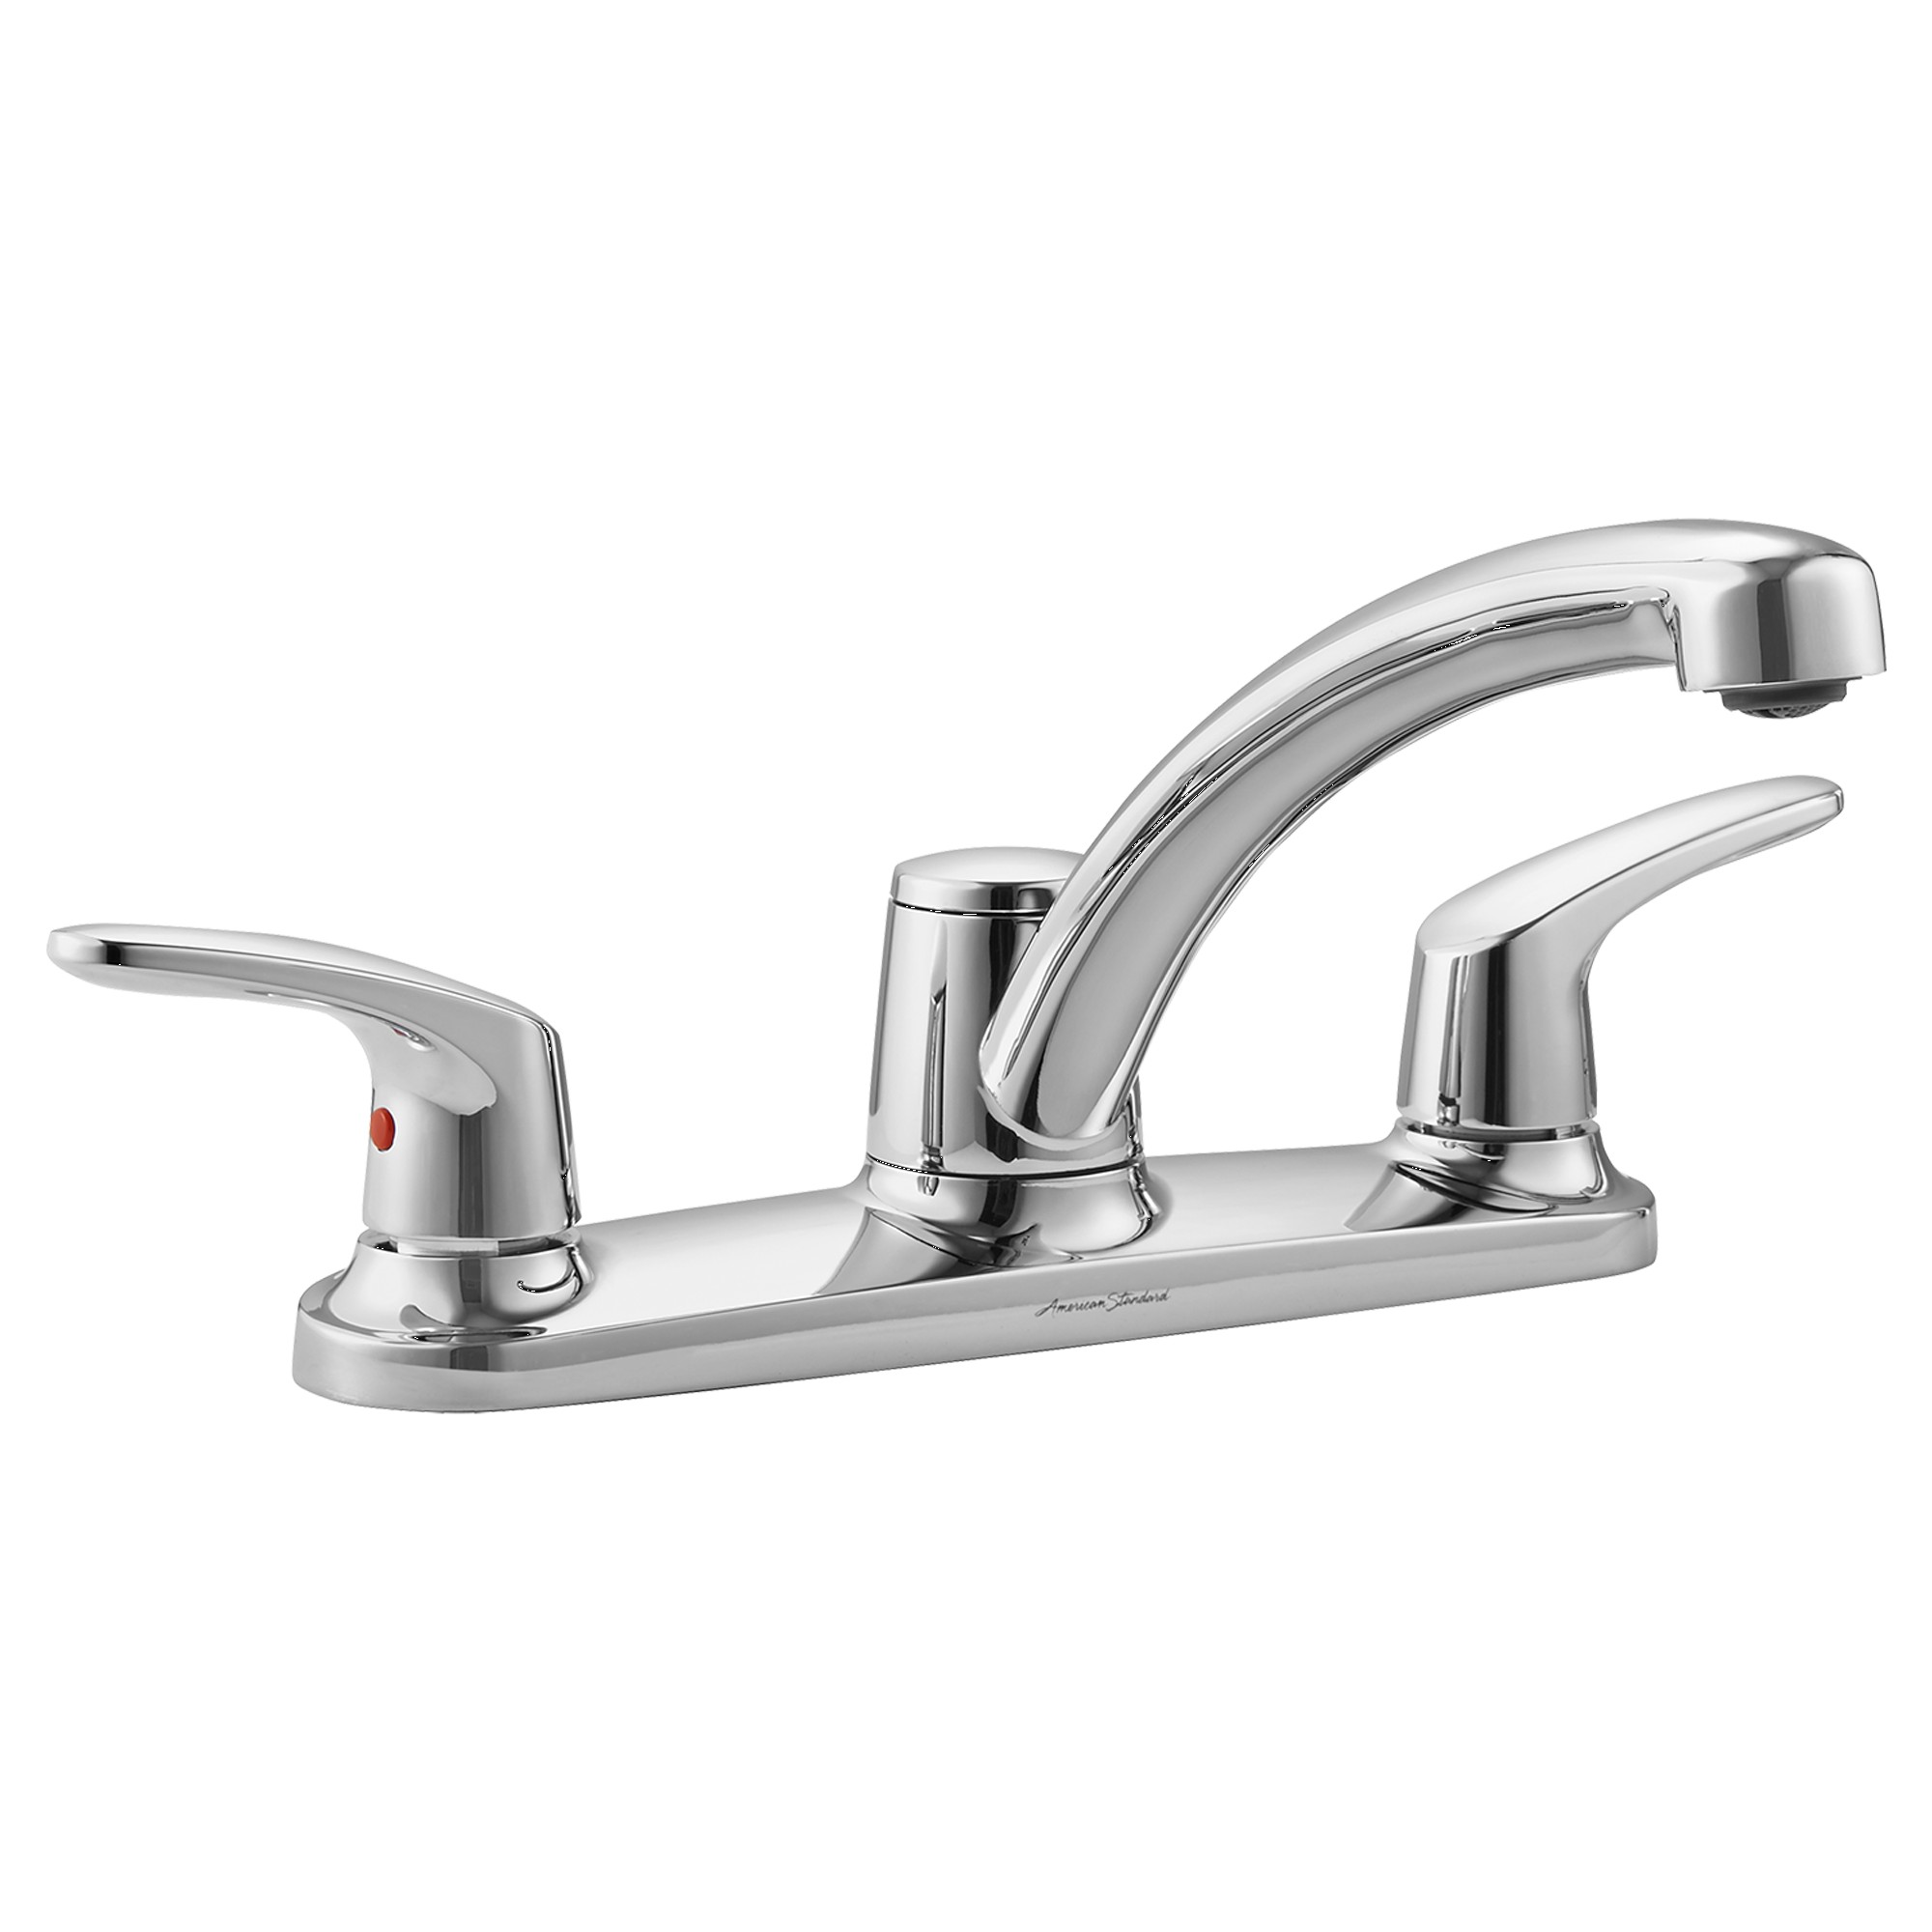 American Standard | 7074.500.002 | AMERICAN STANDARD 7074.500 COLONY PRO 2-HANDLE KITCHEN FAUCET WITH SWIVEL SPOUT CP 002 POLISHED CHROME